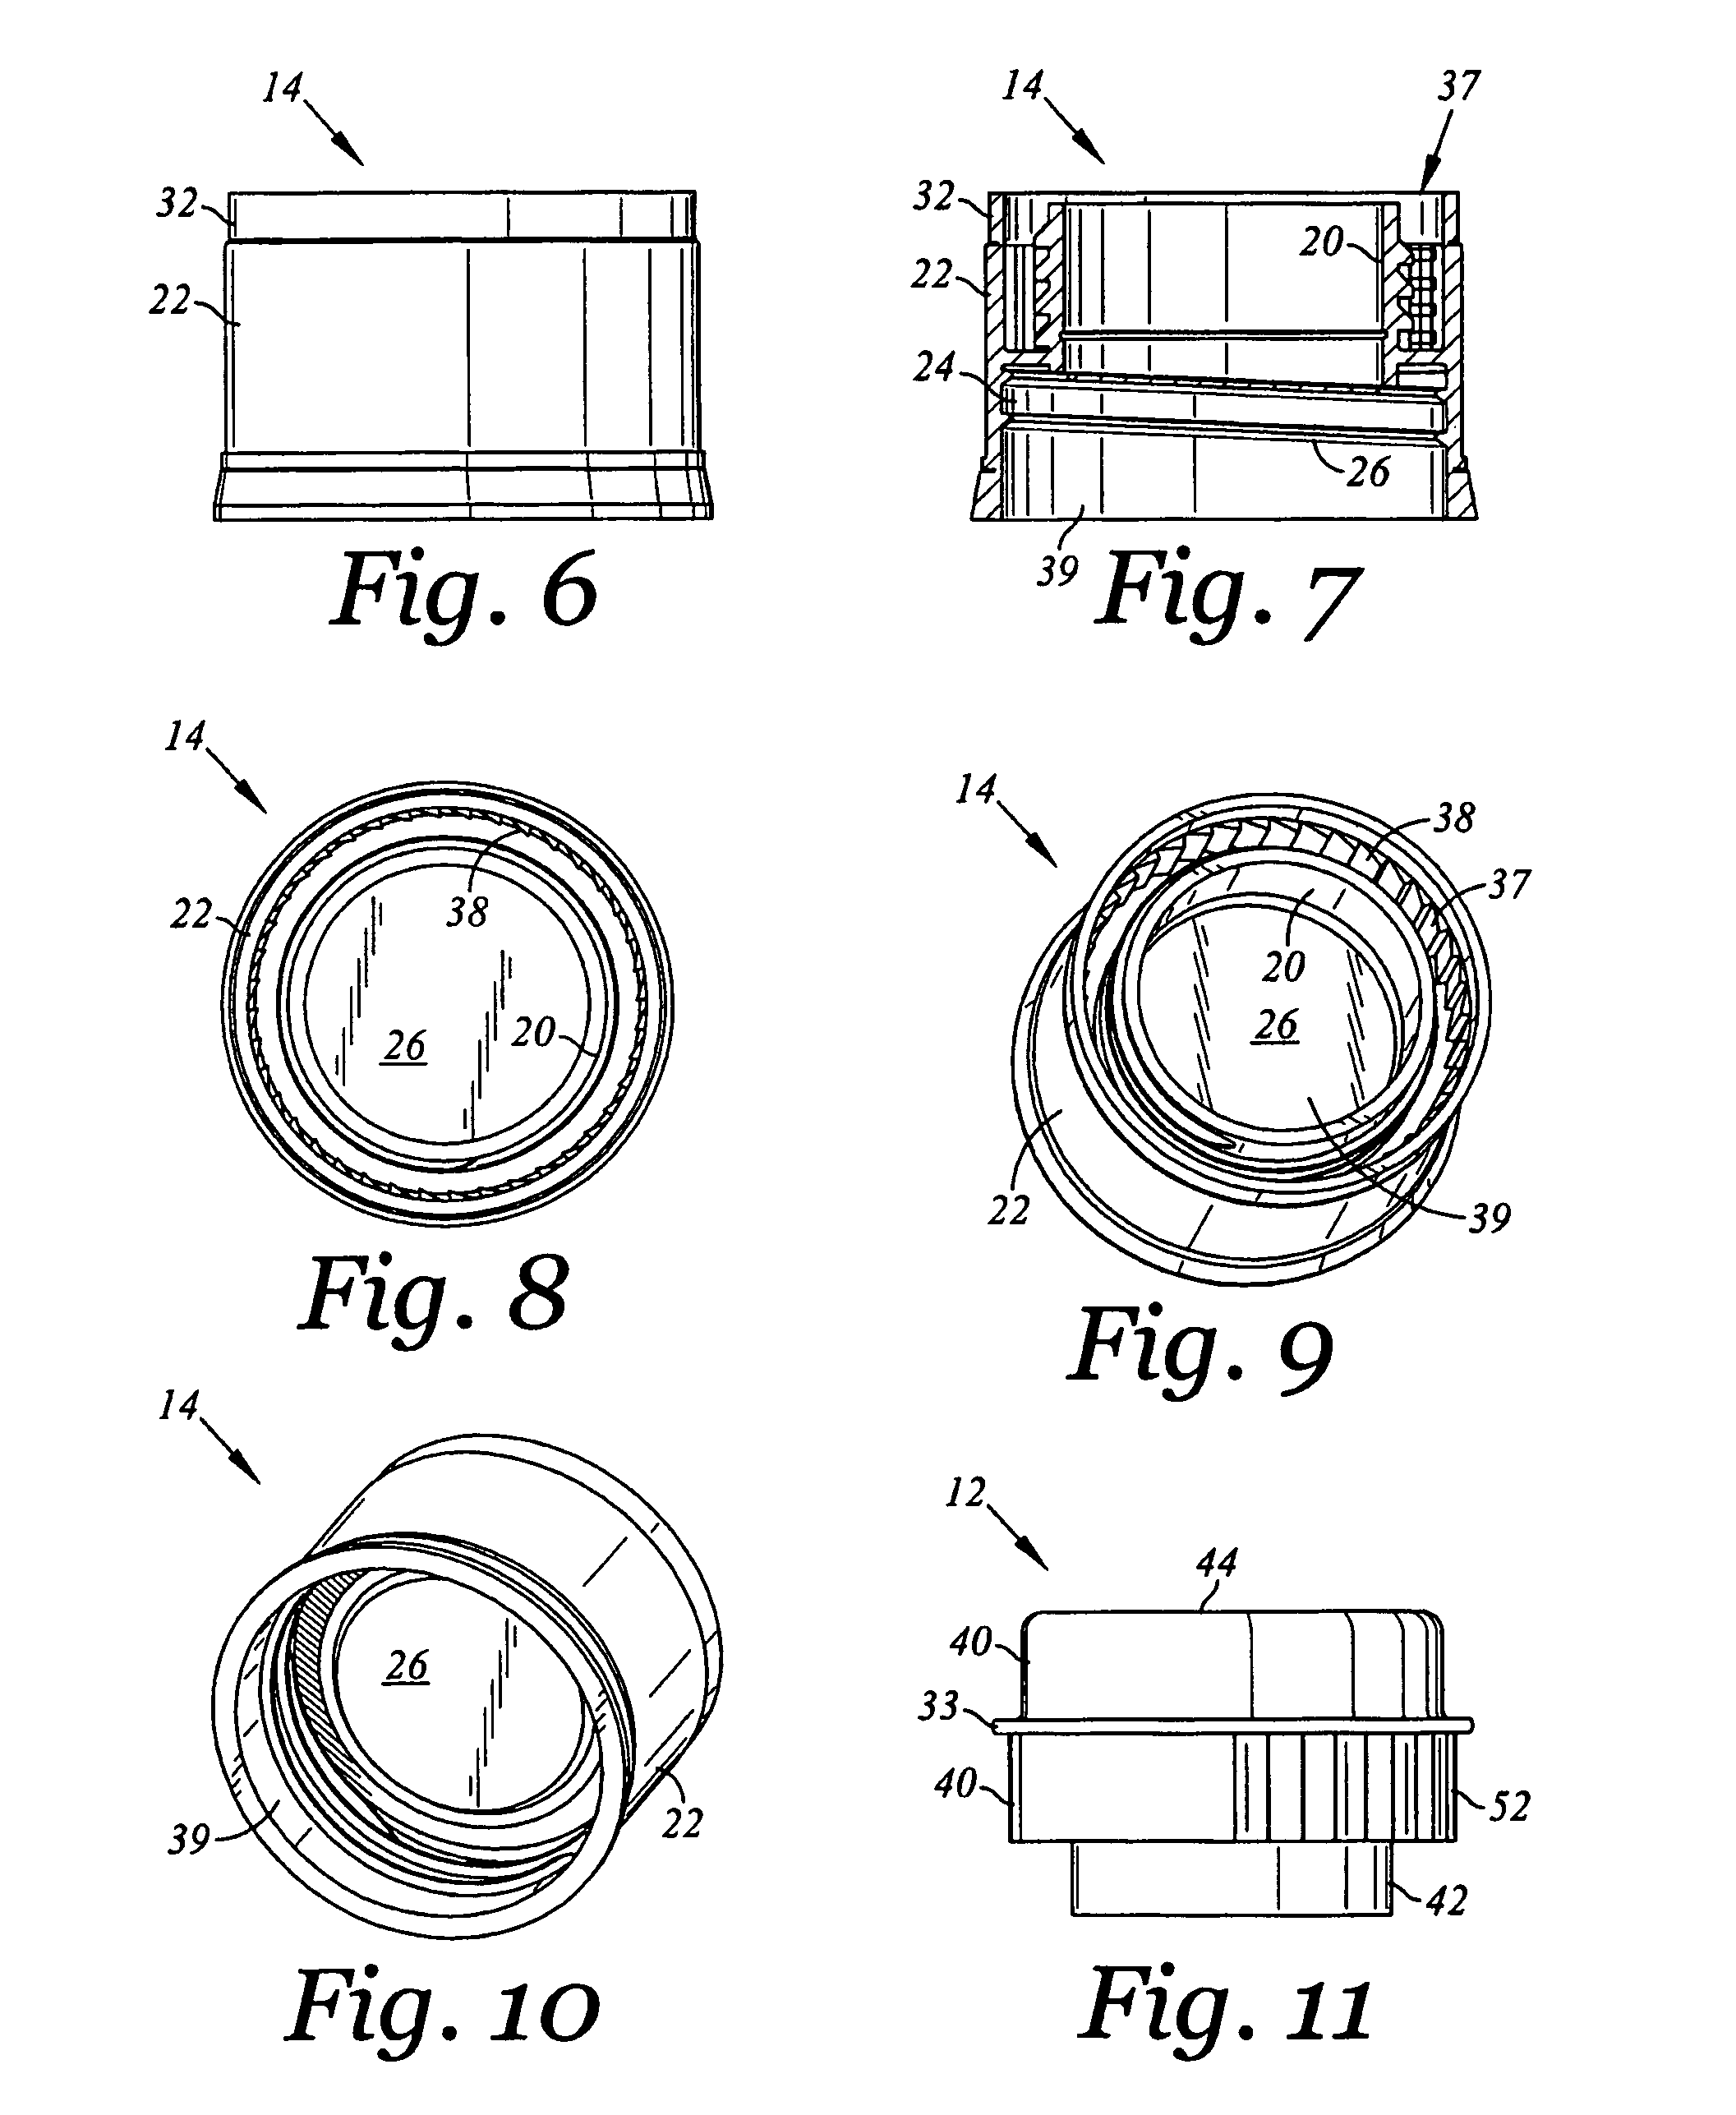 Sealed storage container with a coupling assembly